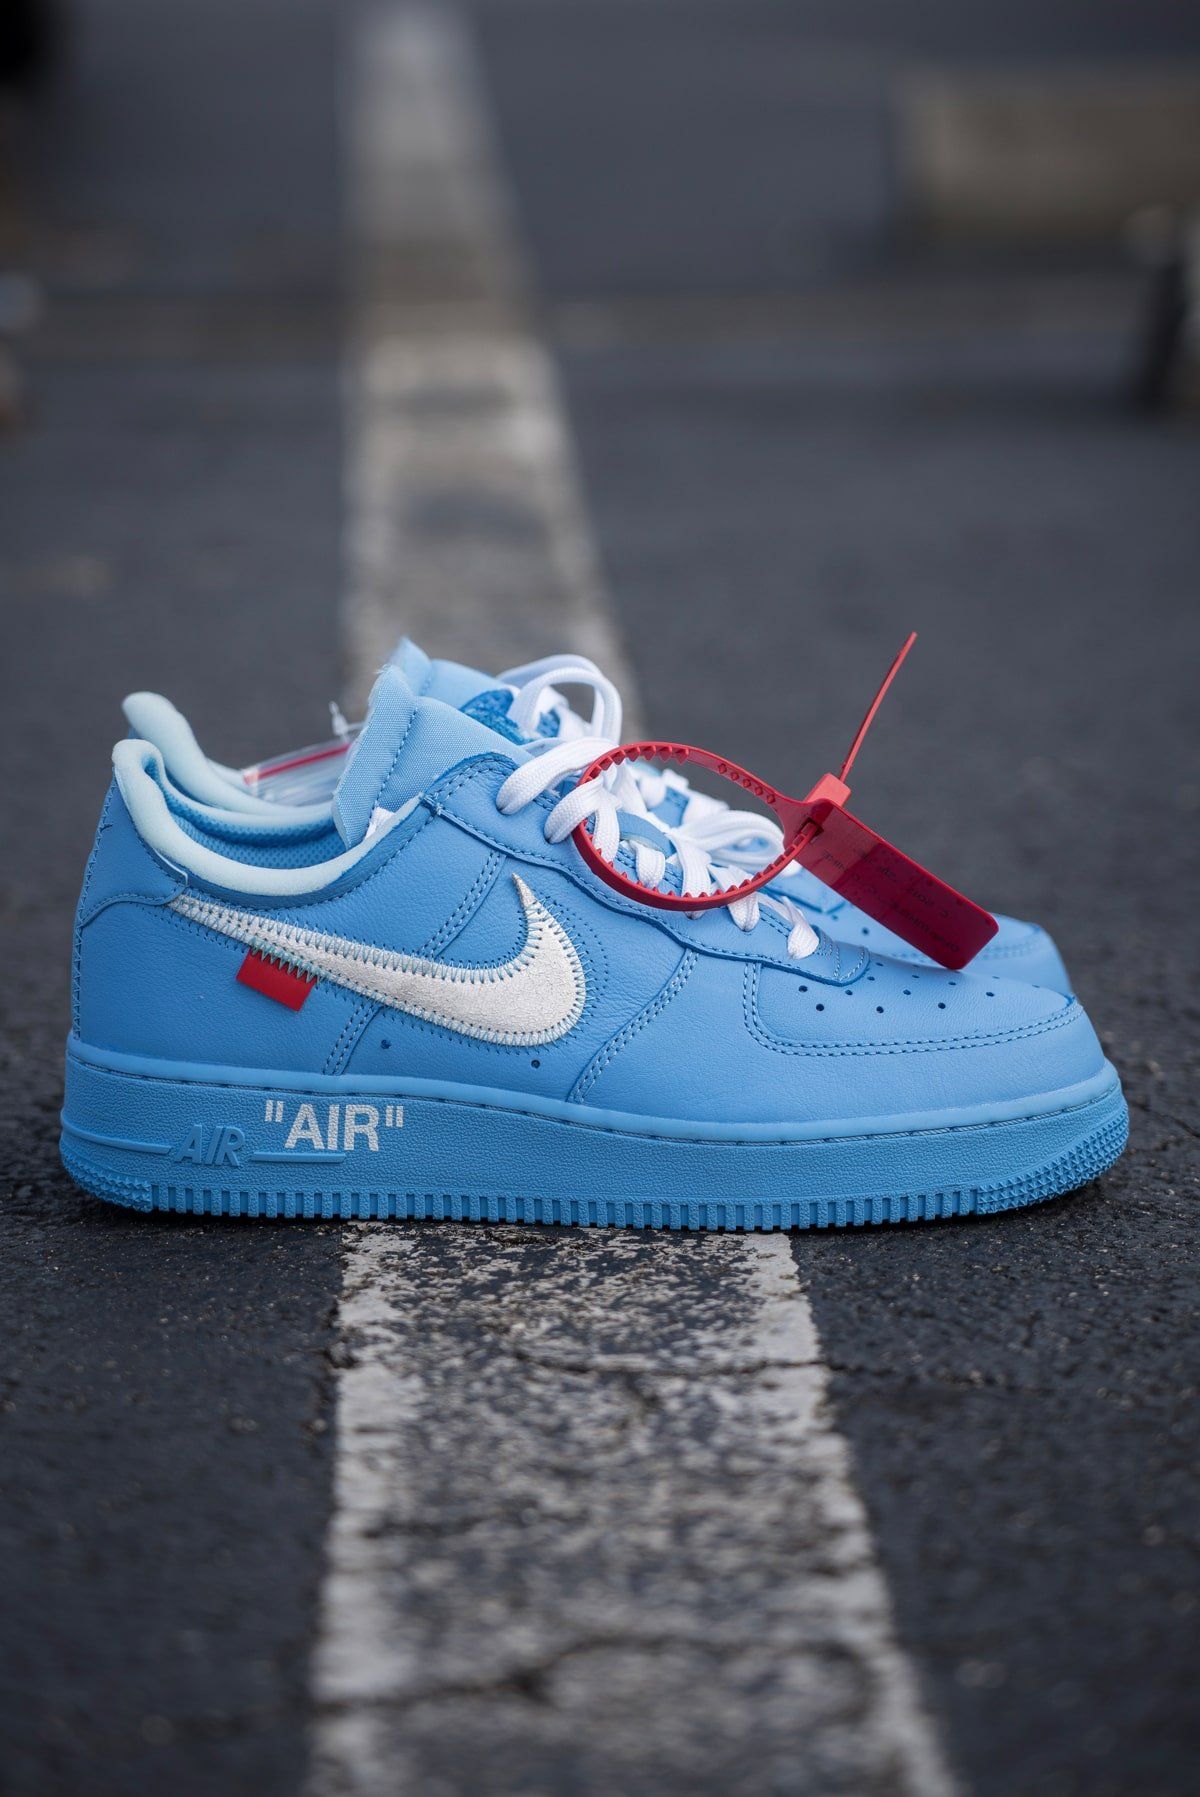 Off White Air Force 1 Wallpapers 